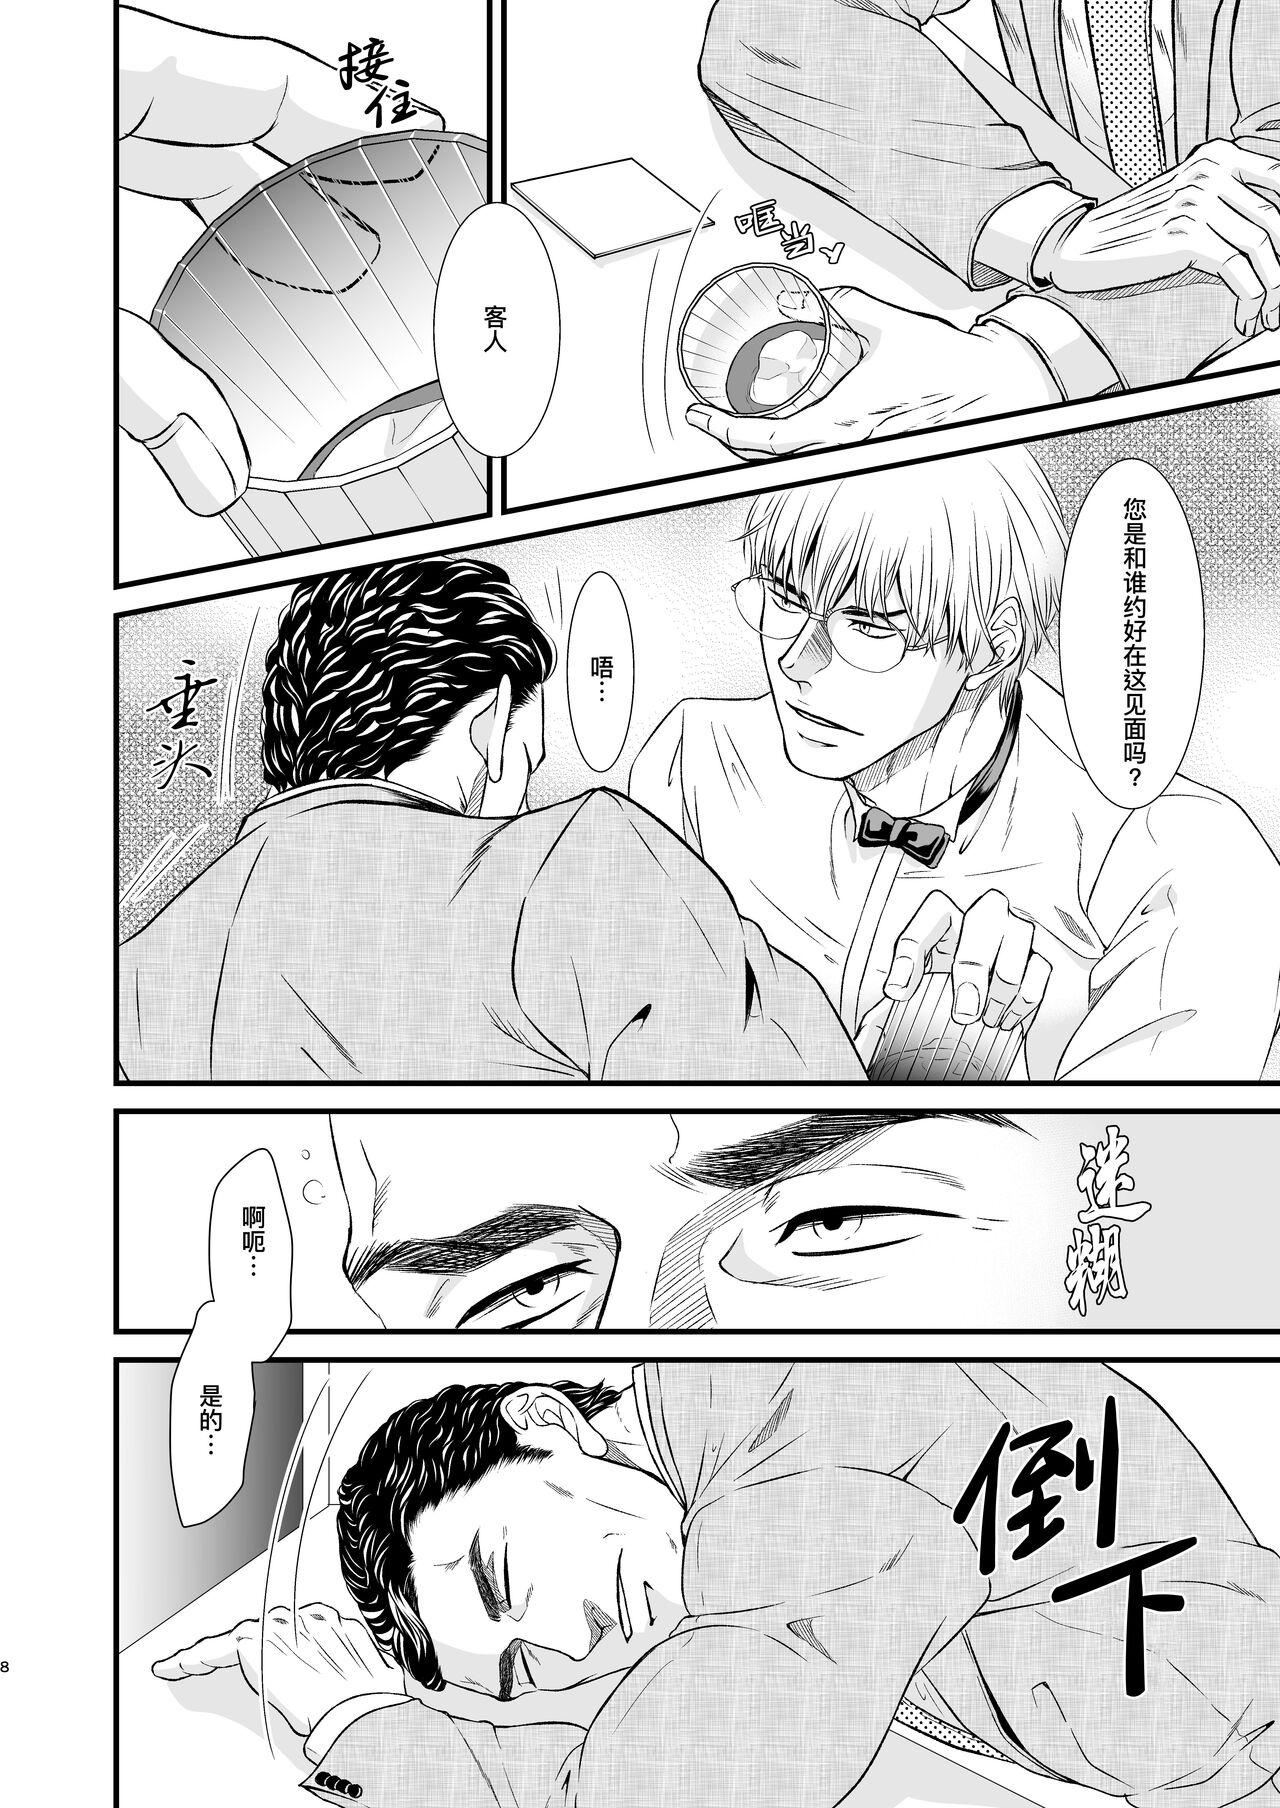 Couch PUNISHMENT 1# | 惩罚霸道总裁-第1卷 - Original Naked - Page 8